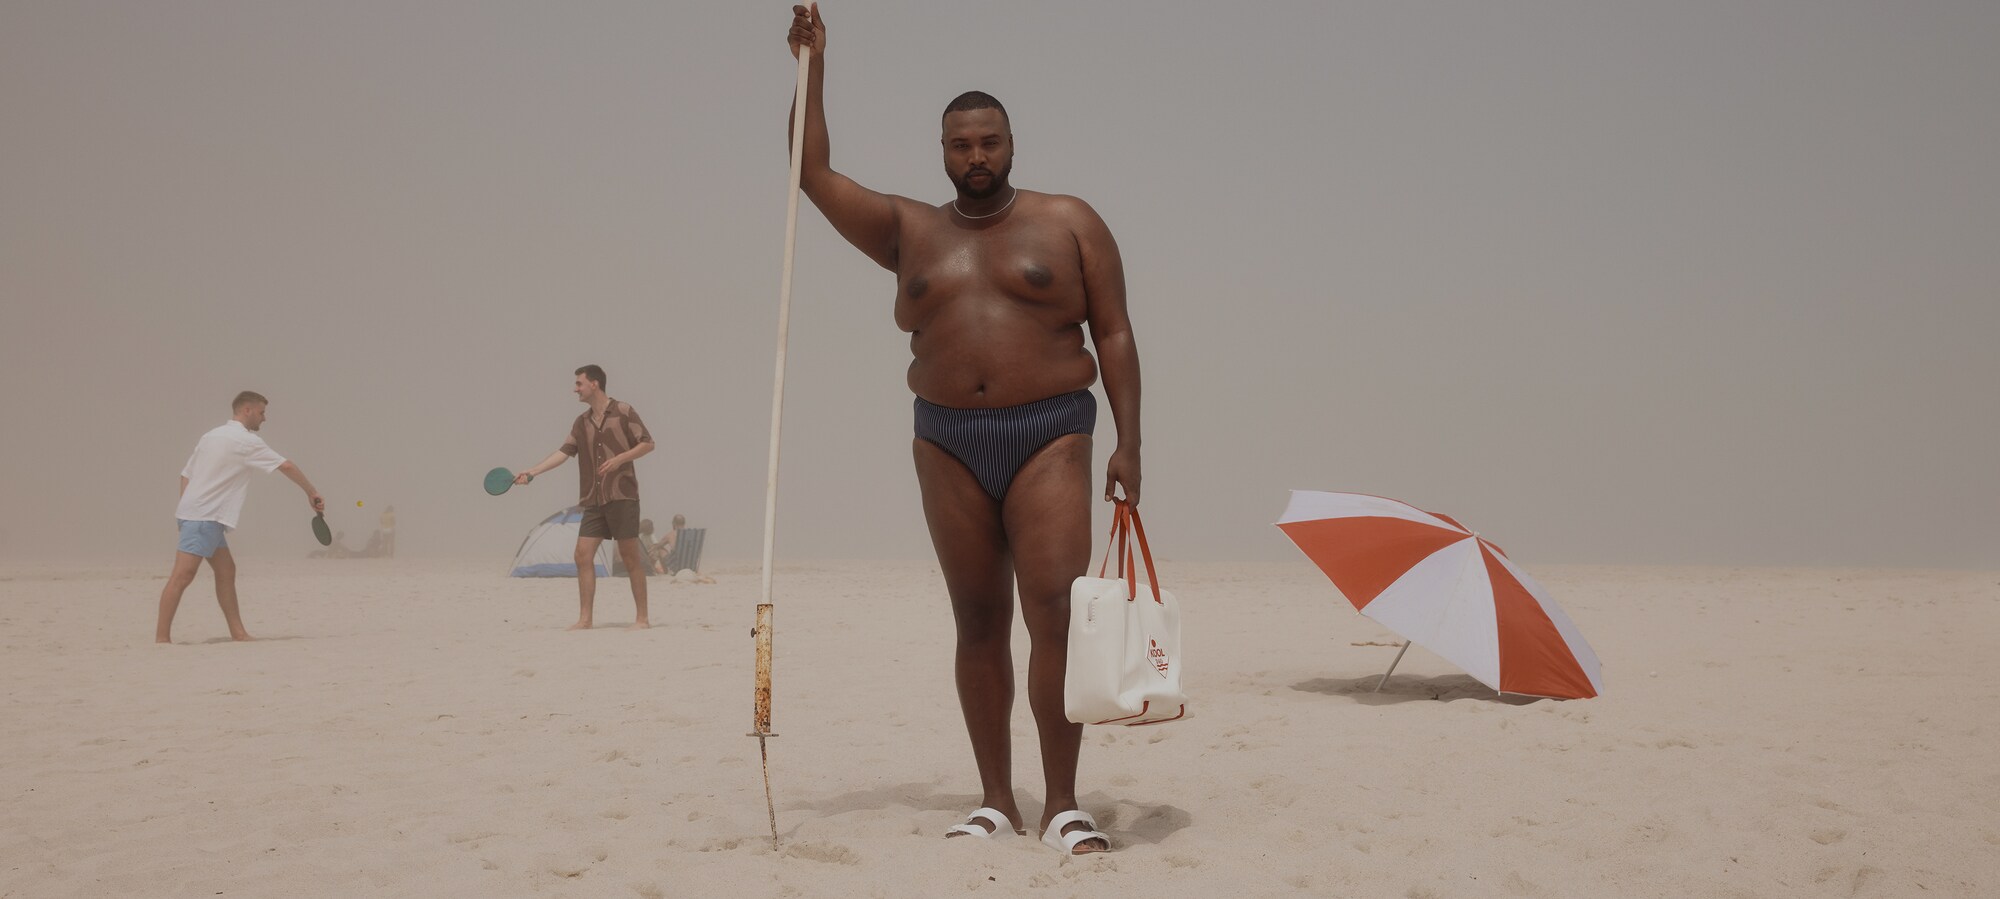 Find your champion pieces Swimwear for curvy men